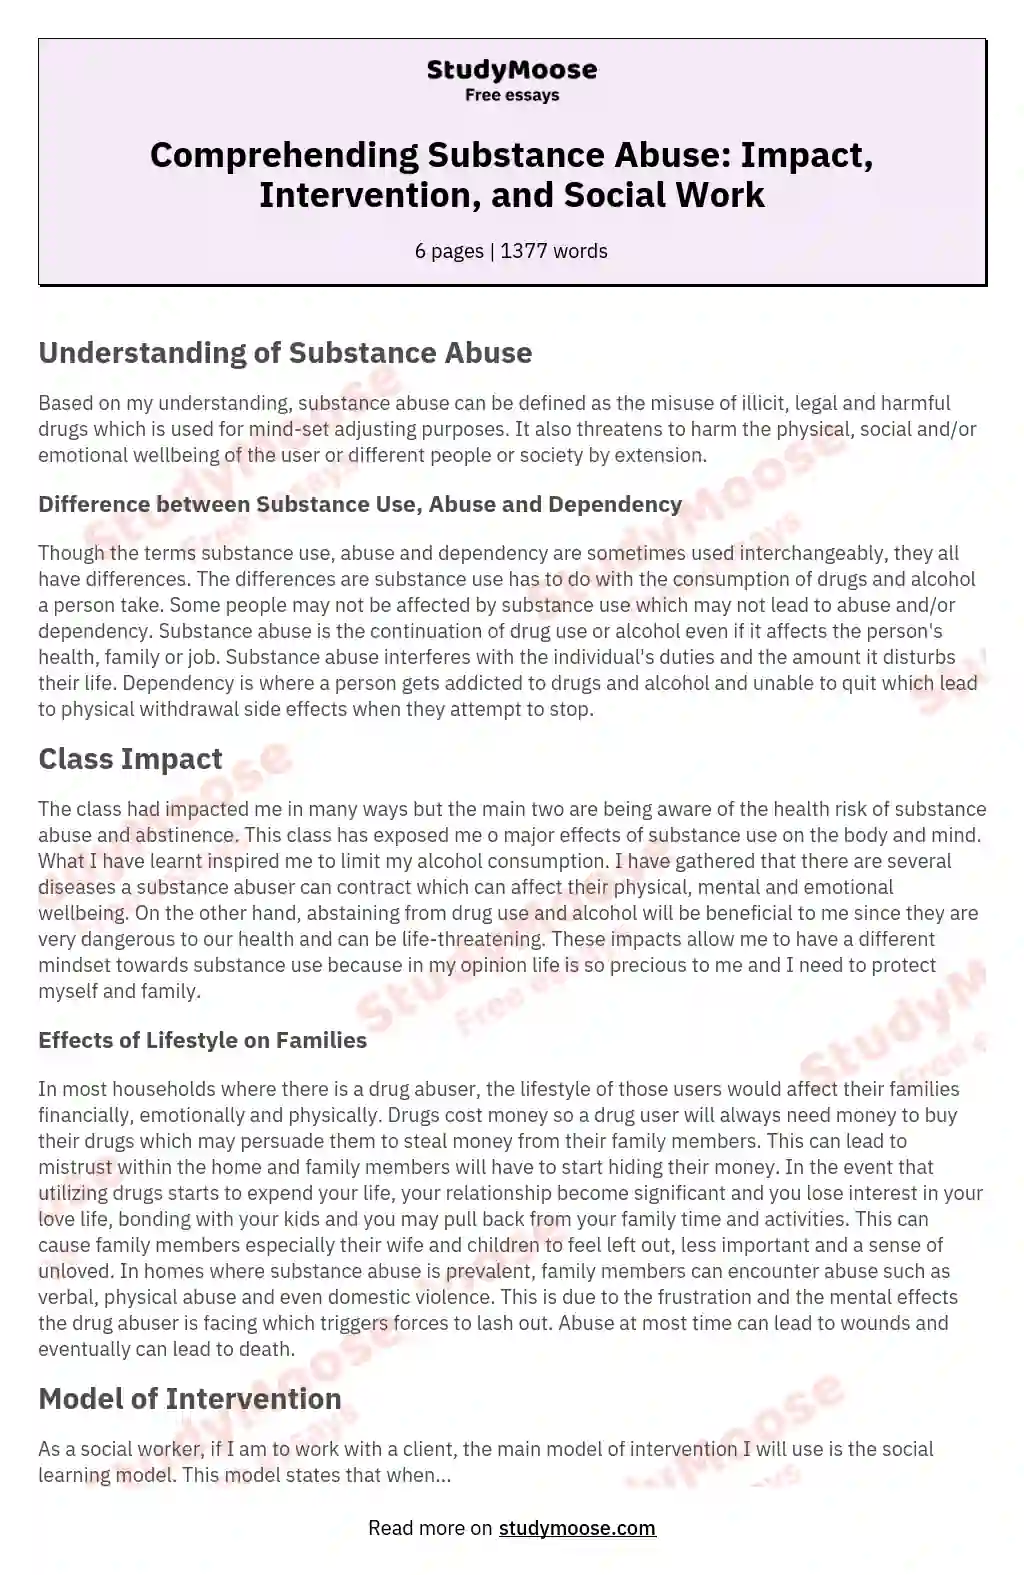 Comprehending Substance Abuse: Impact, Intervention, and Social Work essay